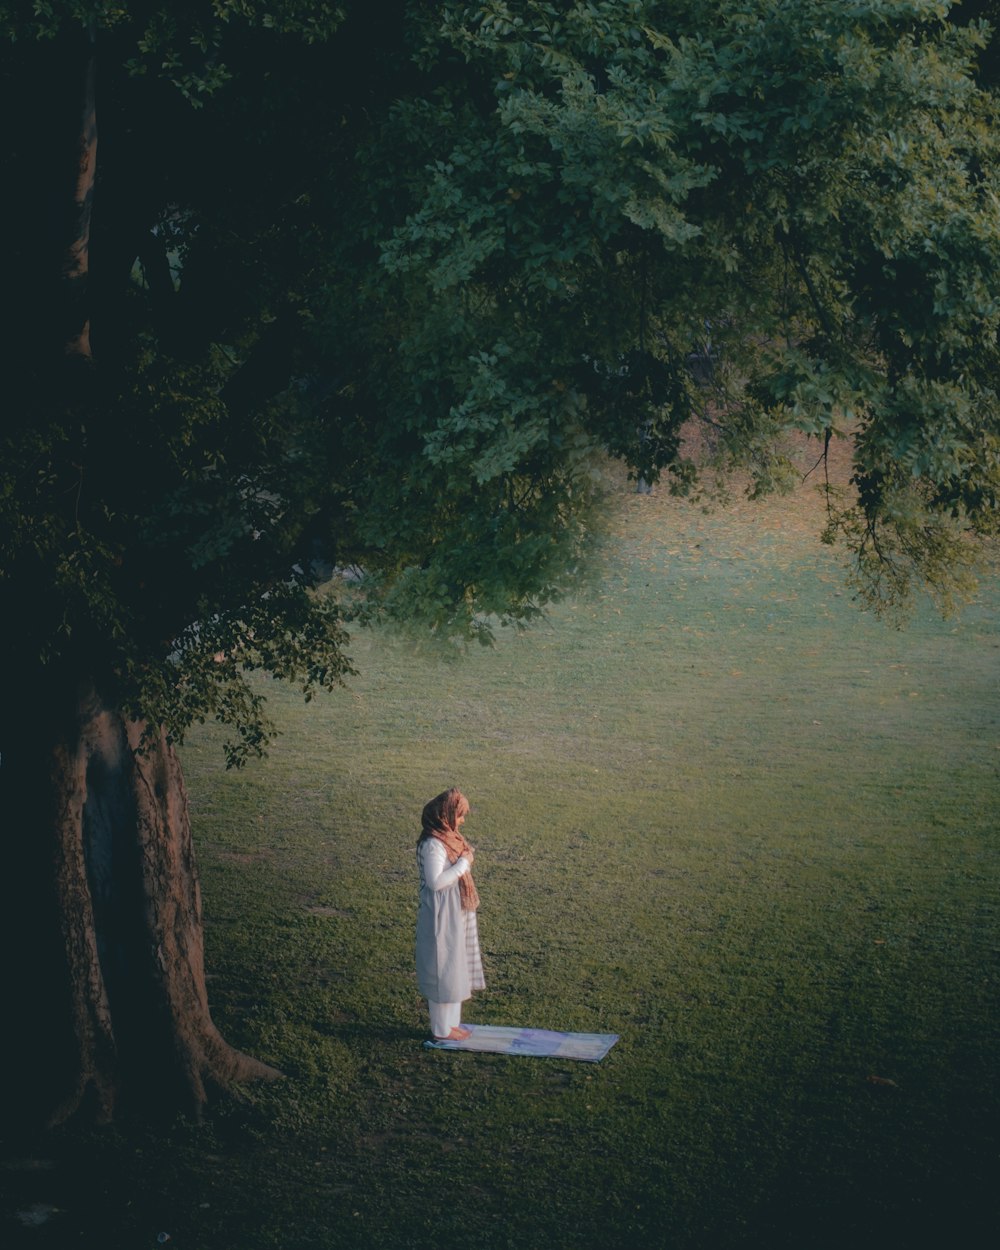 a person standing on a mat in a grassy area with trees